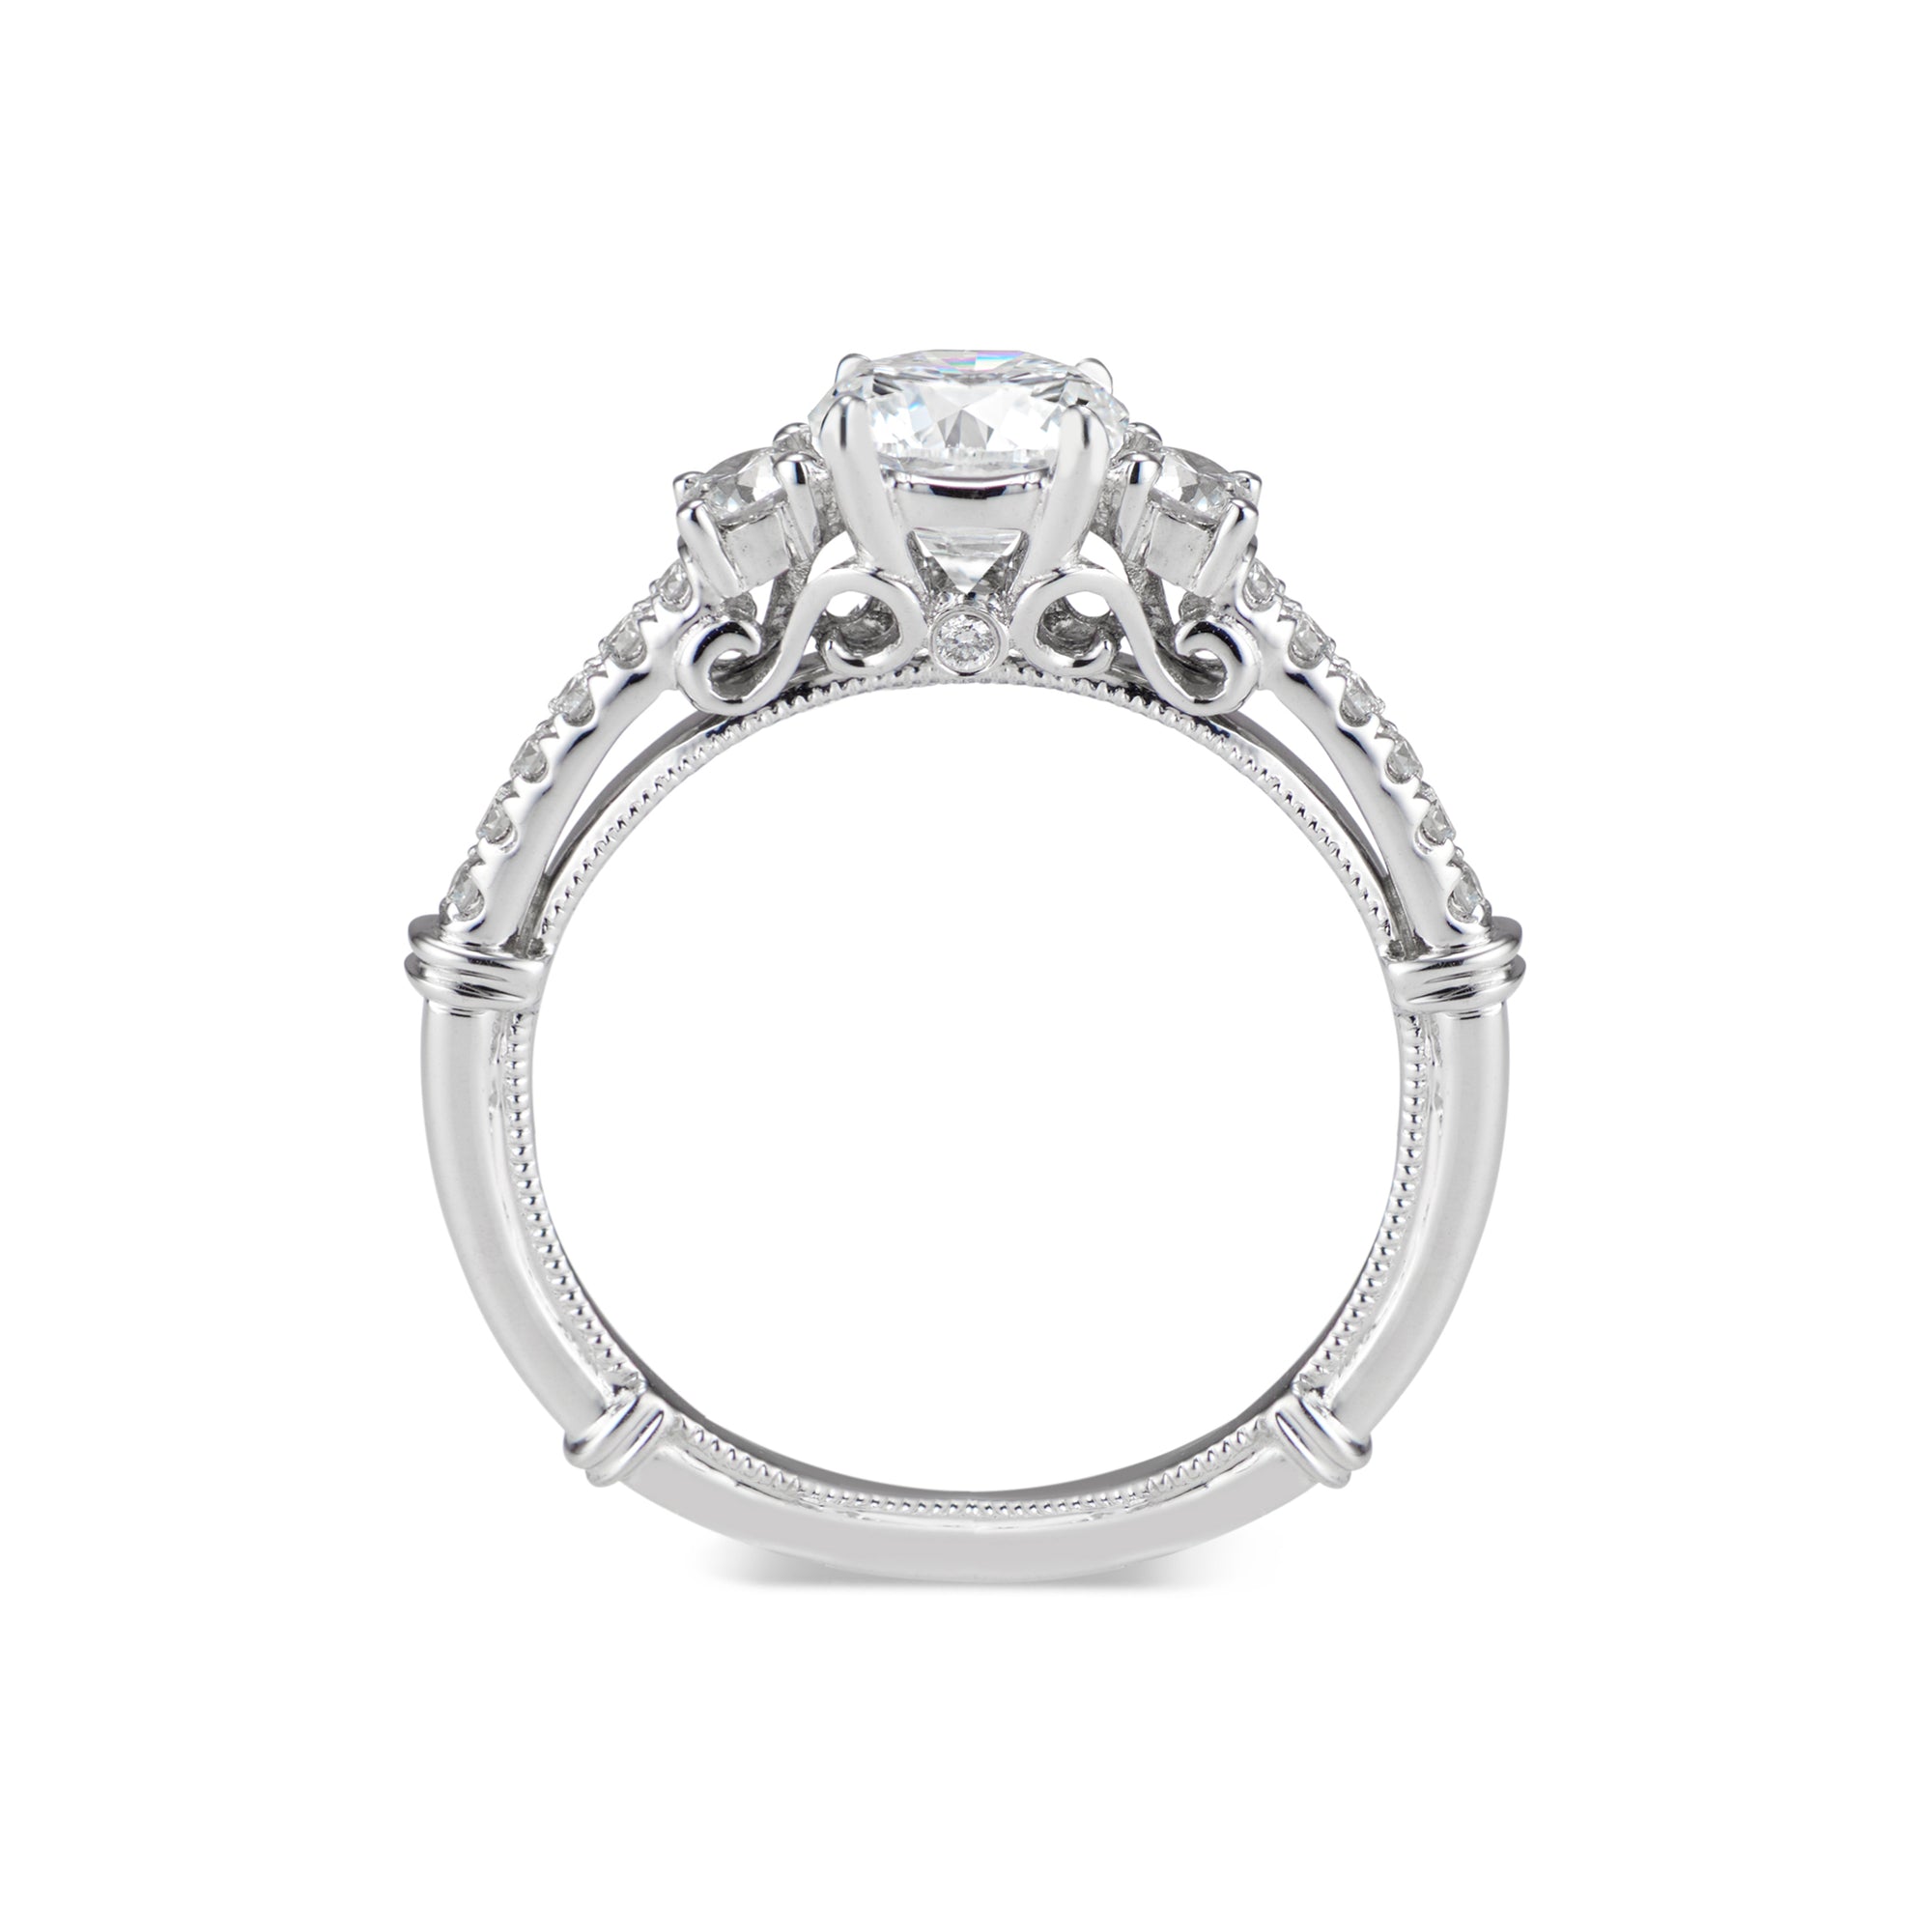 Three-Stone Engagement Ring with Diamond Shoulders  -18k weighting 3.93 GR  - 16 round diamonds totaling 0.36 carats